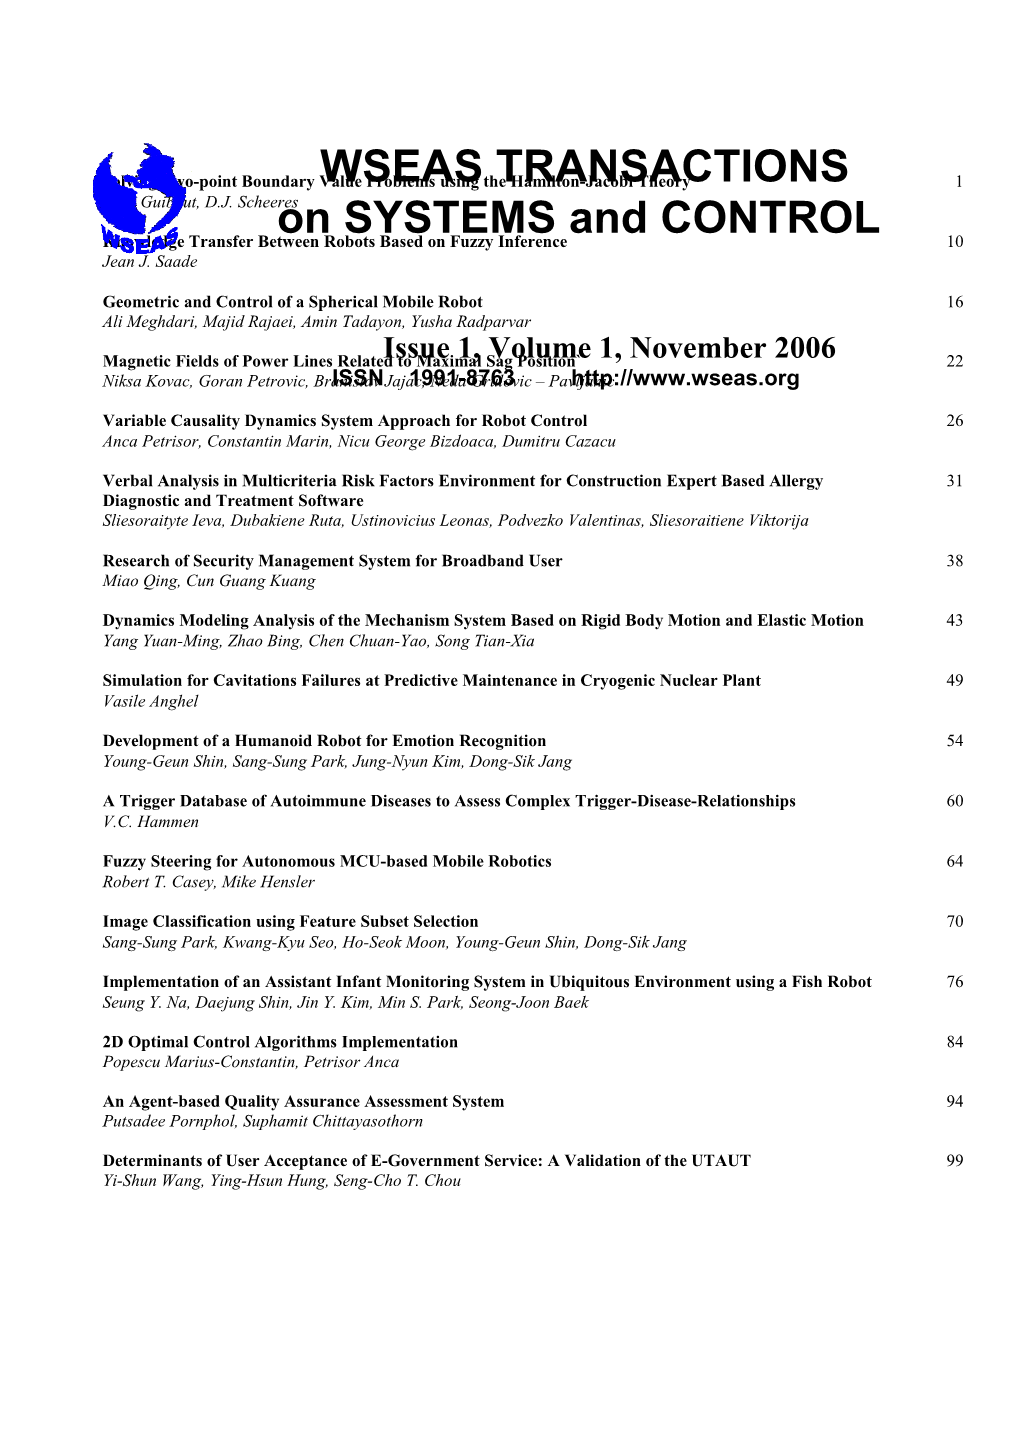 WSEAS Trans. on SYSTEMS and CONTROL, November 2006